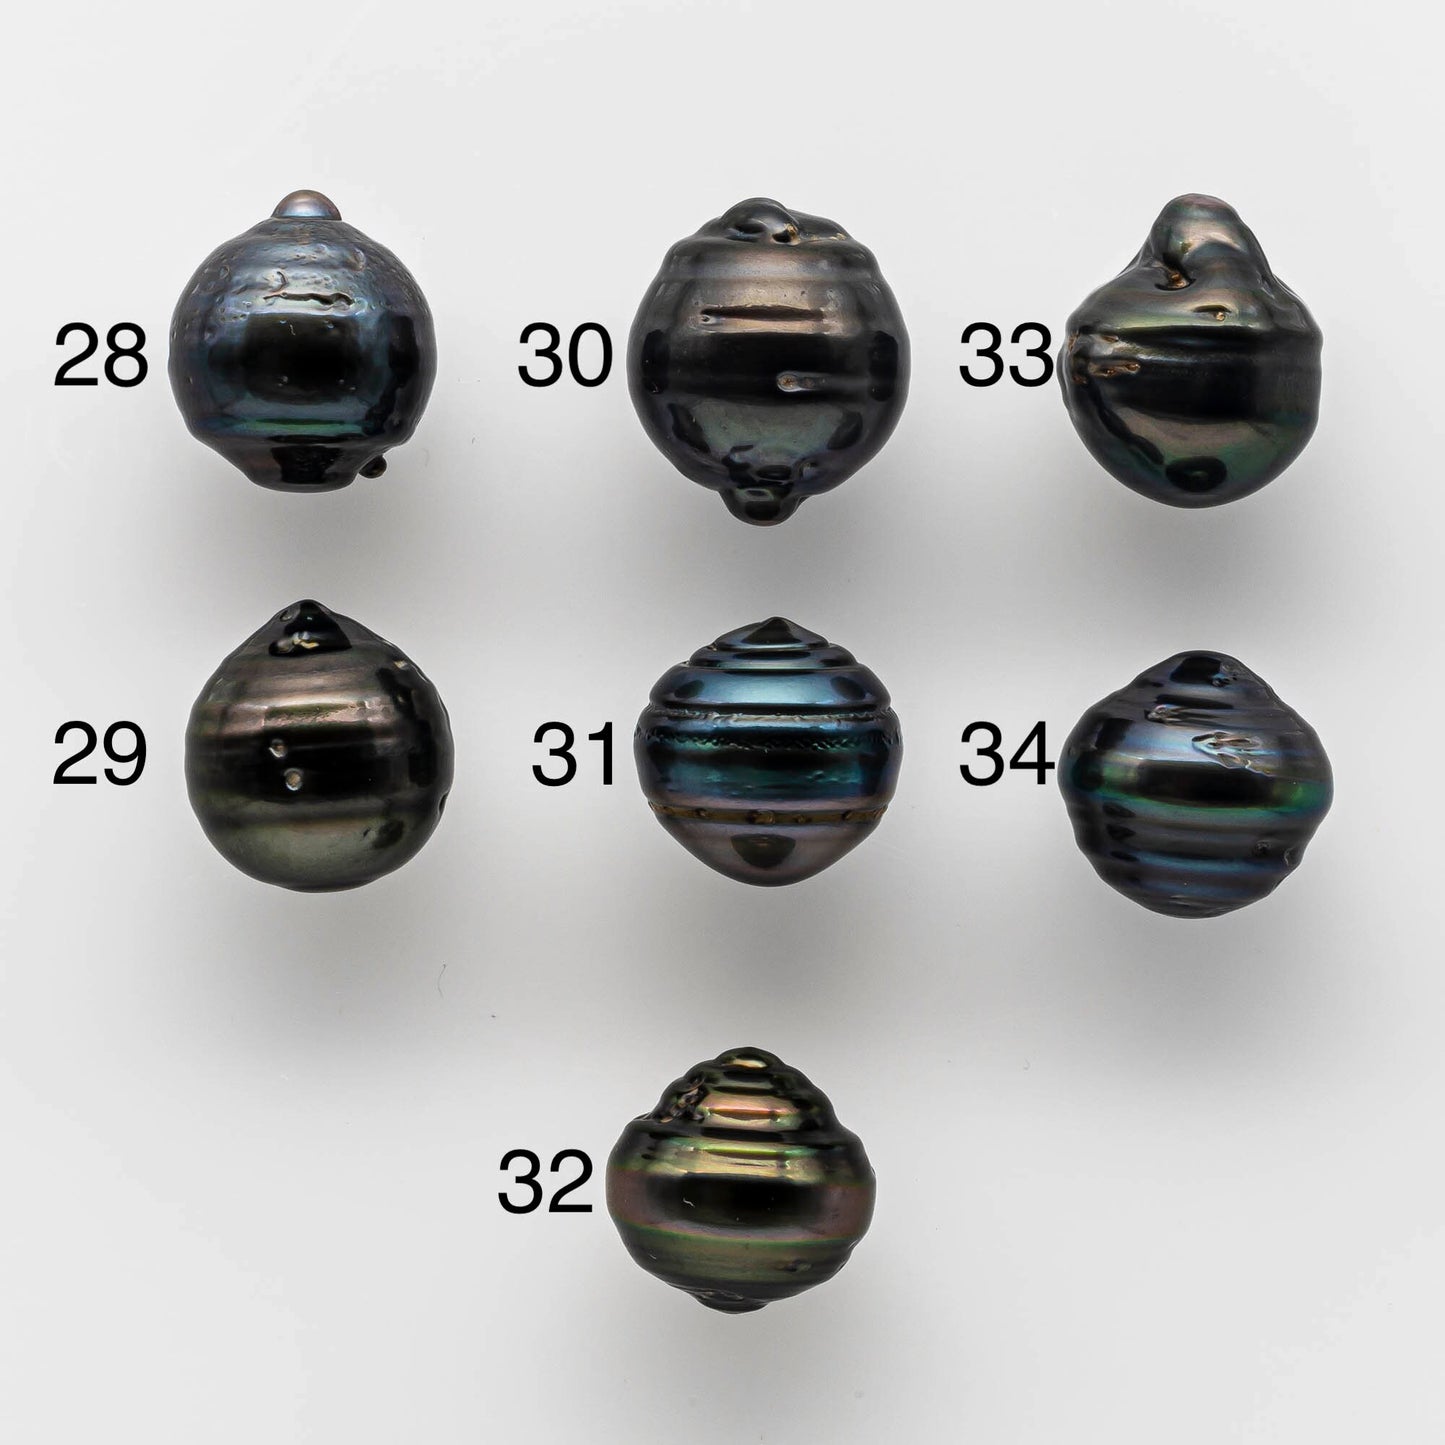 13-14mm Black Tahitian Pearl Bead Drop Loose Undrilled with High Luster and Natural Color, Half or Full Drilled to Large Hole, SKU # 1661TH